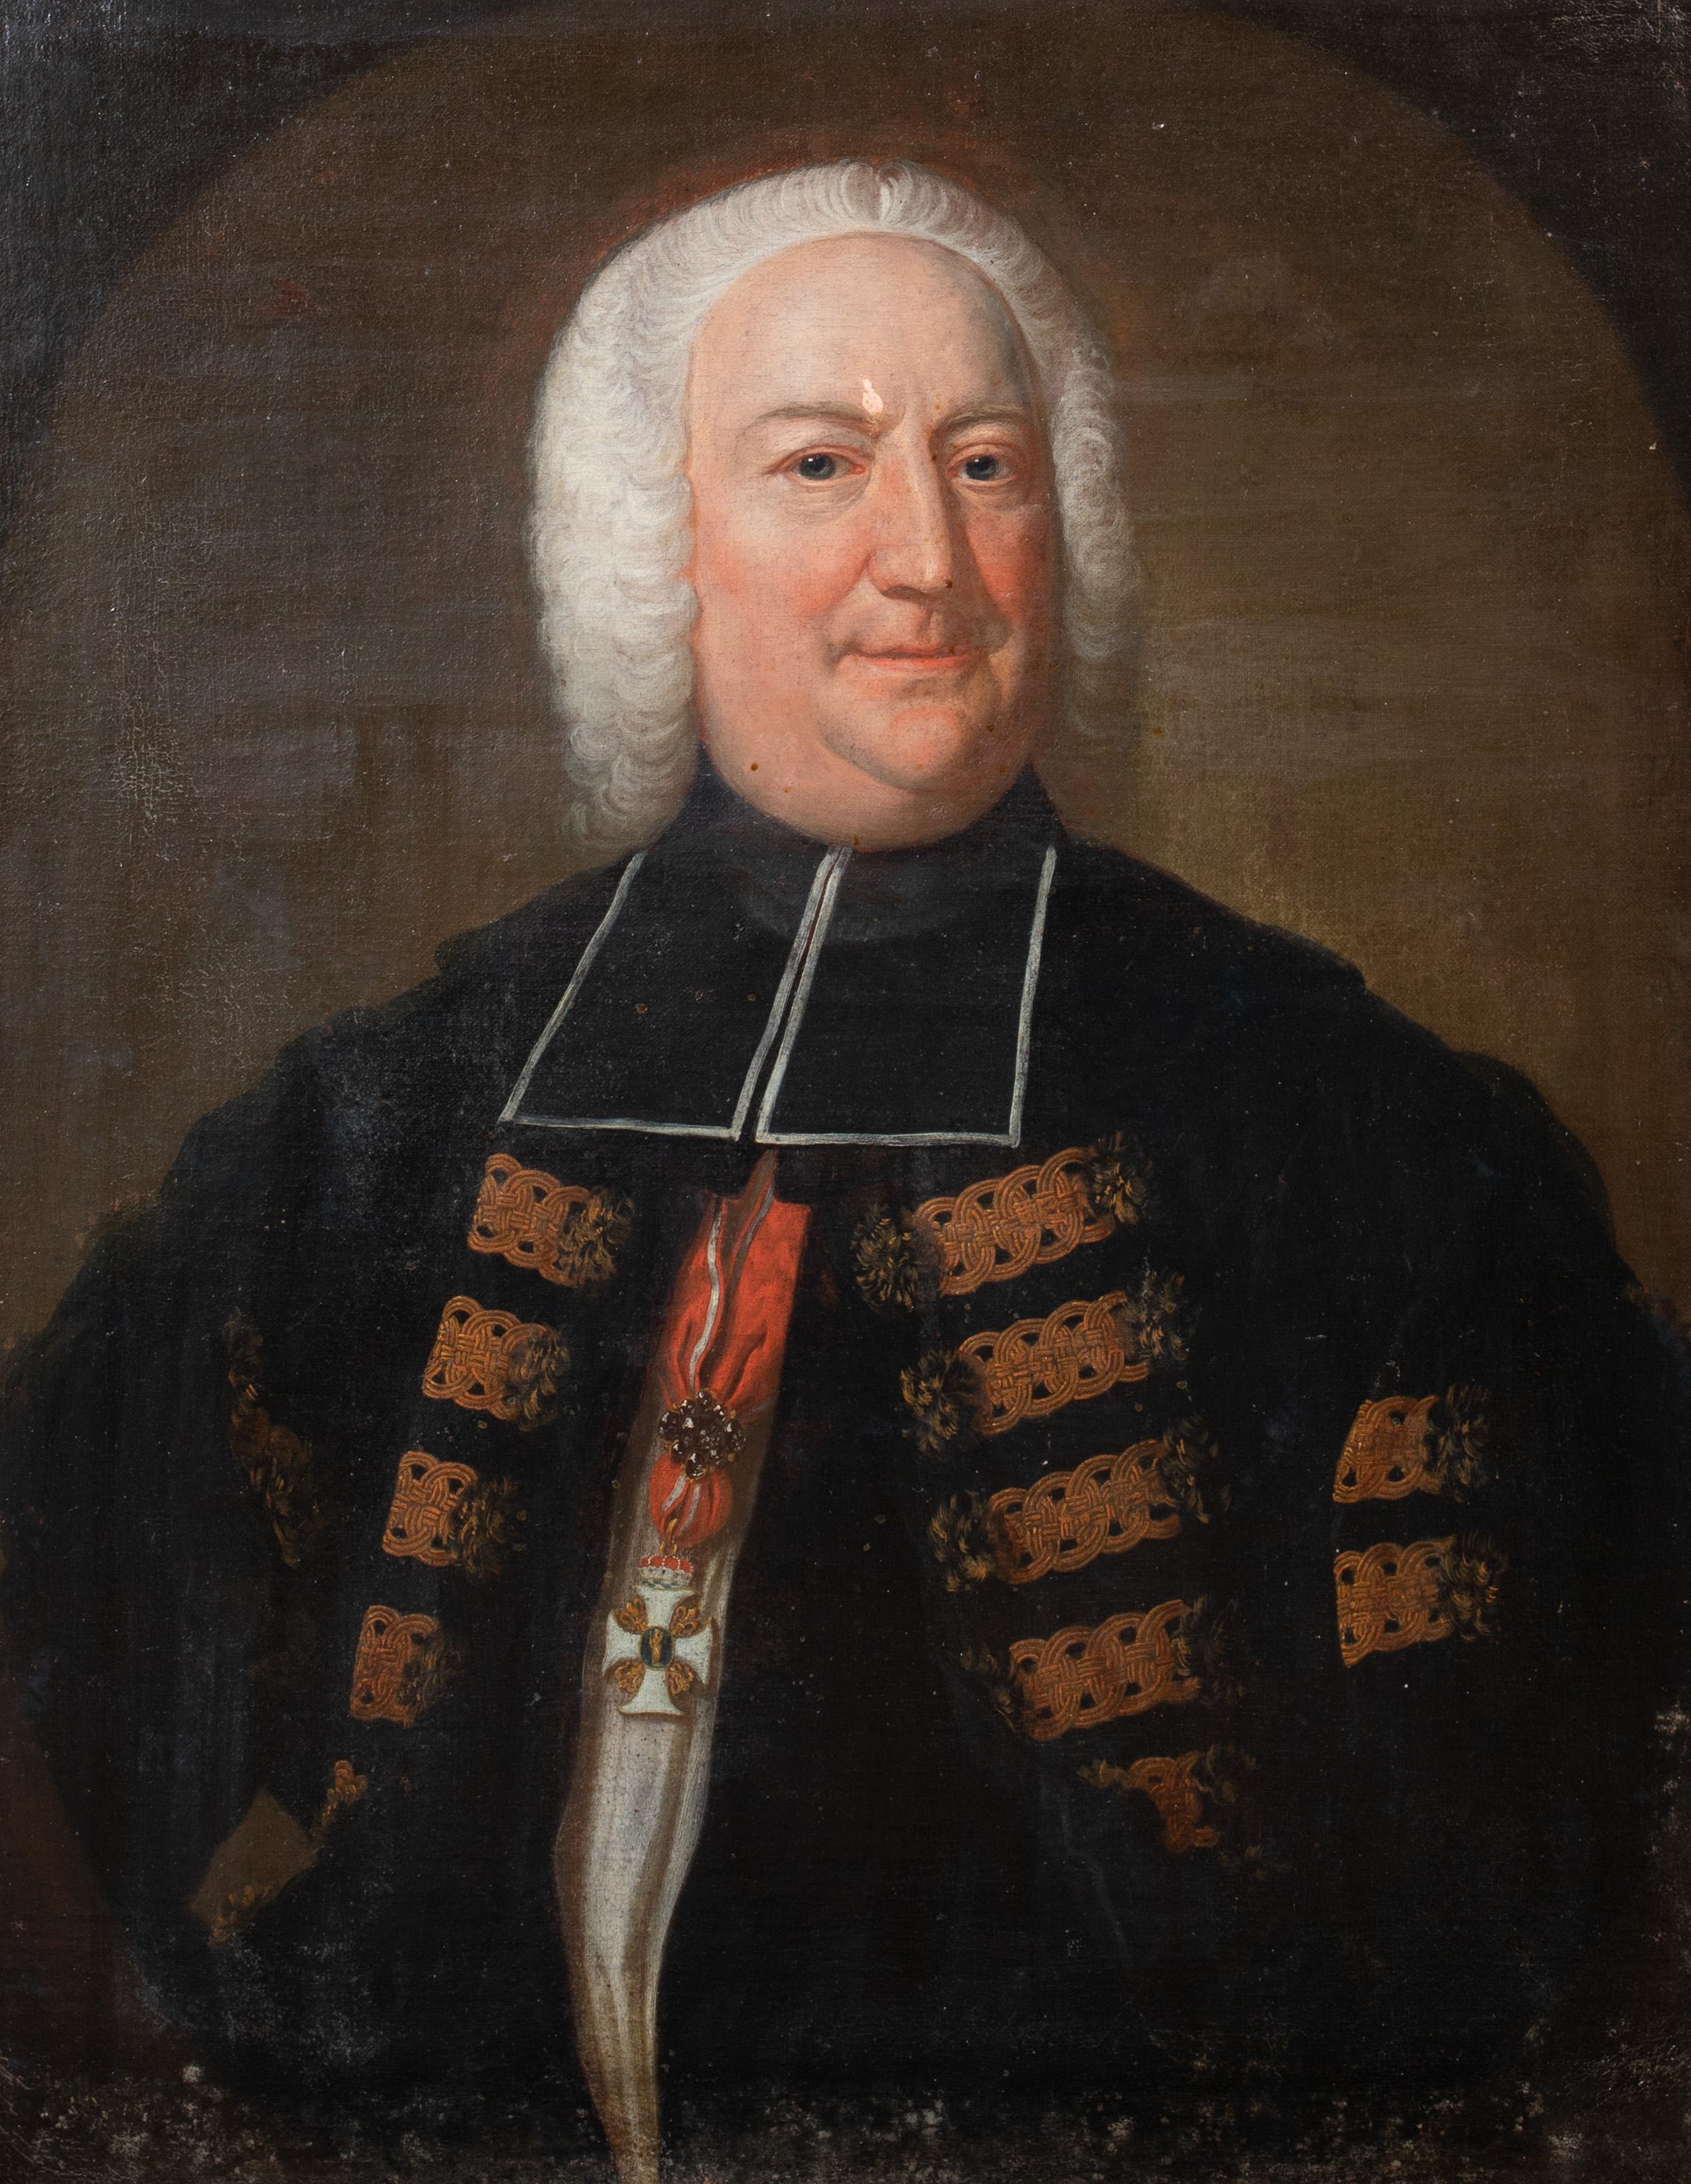 Portrait Of Edme Mongin Bishop Of Bazas (1668-1746), circa 1730

French School

Large 18th Century French School portrait of Edme Mongin Bishop Of Bazas (1668-1746), oil on canvas. Good quality and condition portrait of the French preacher and